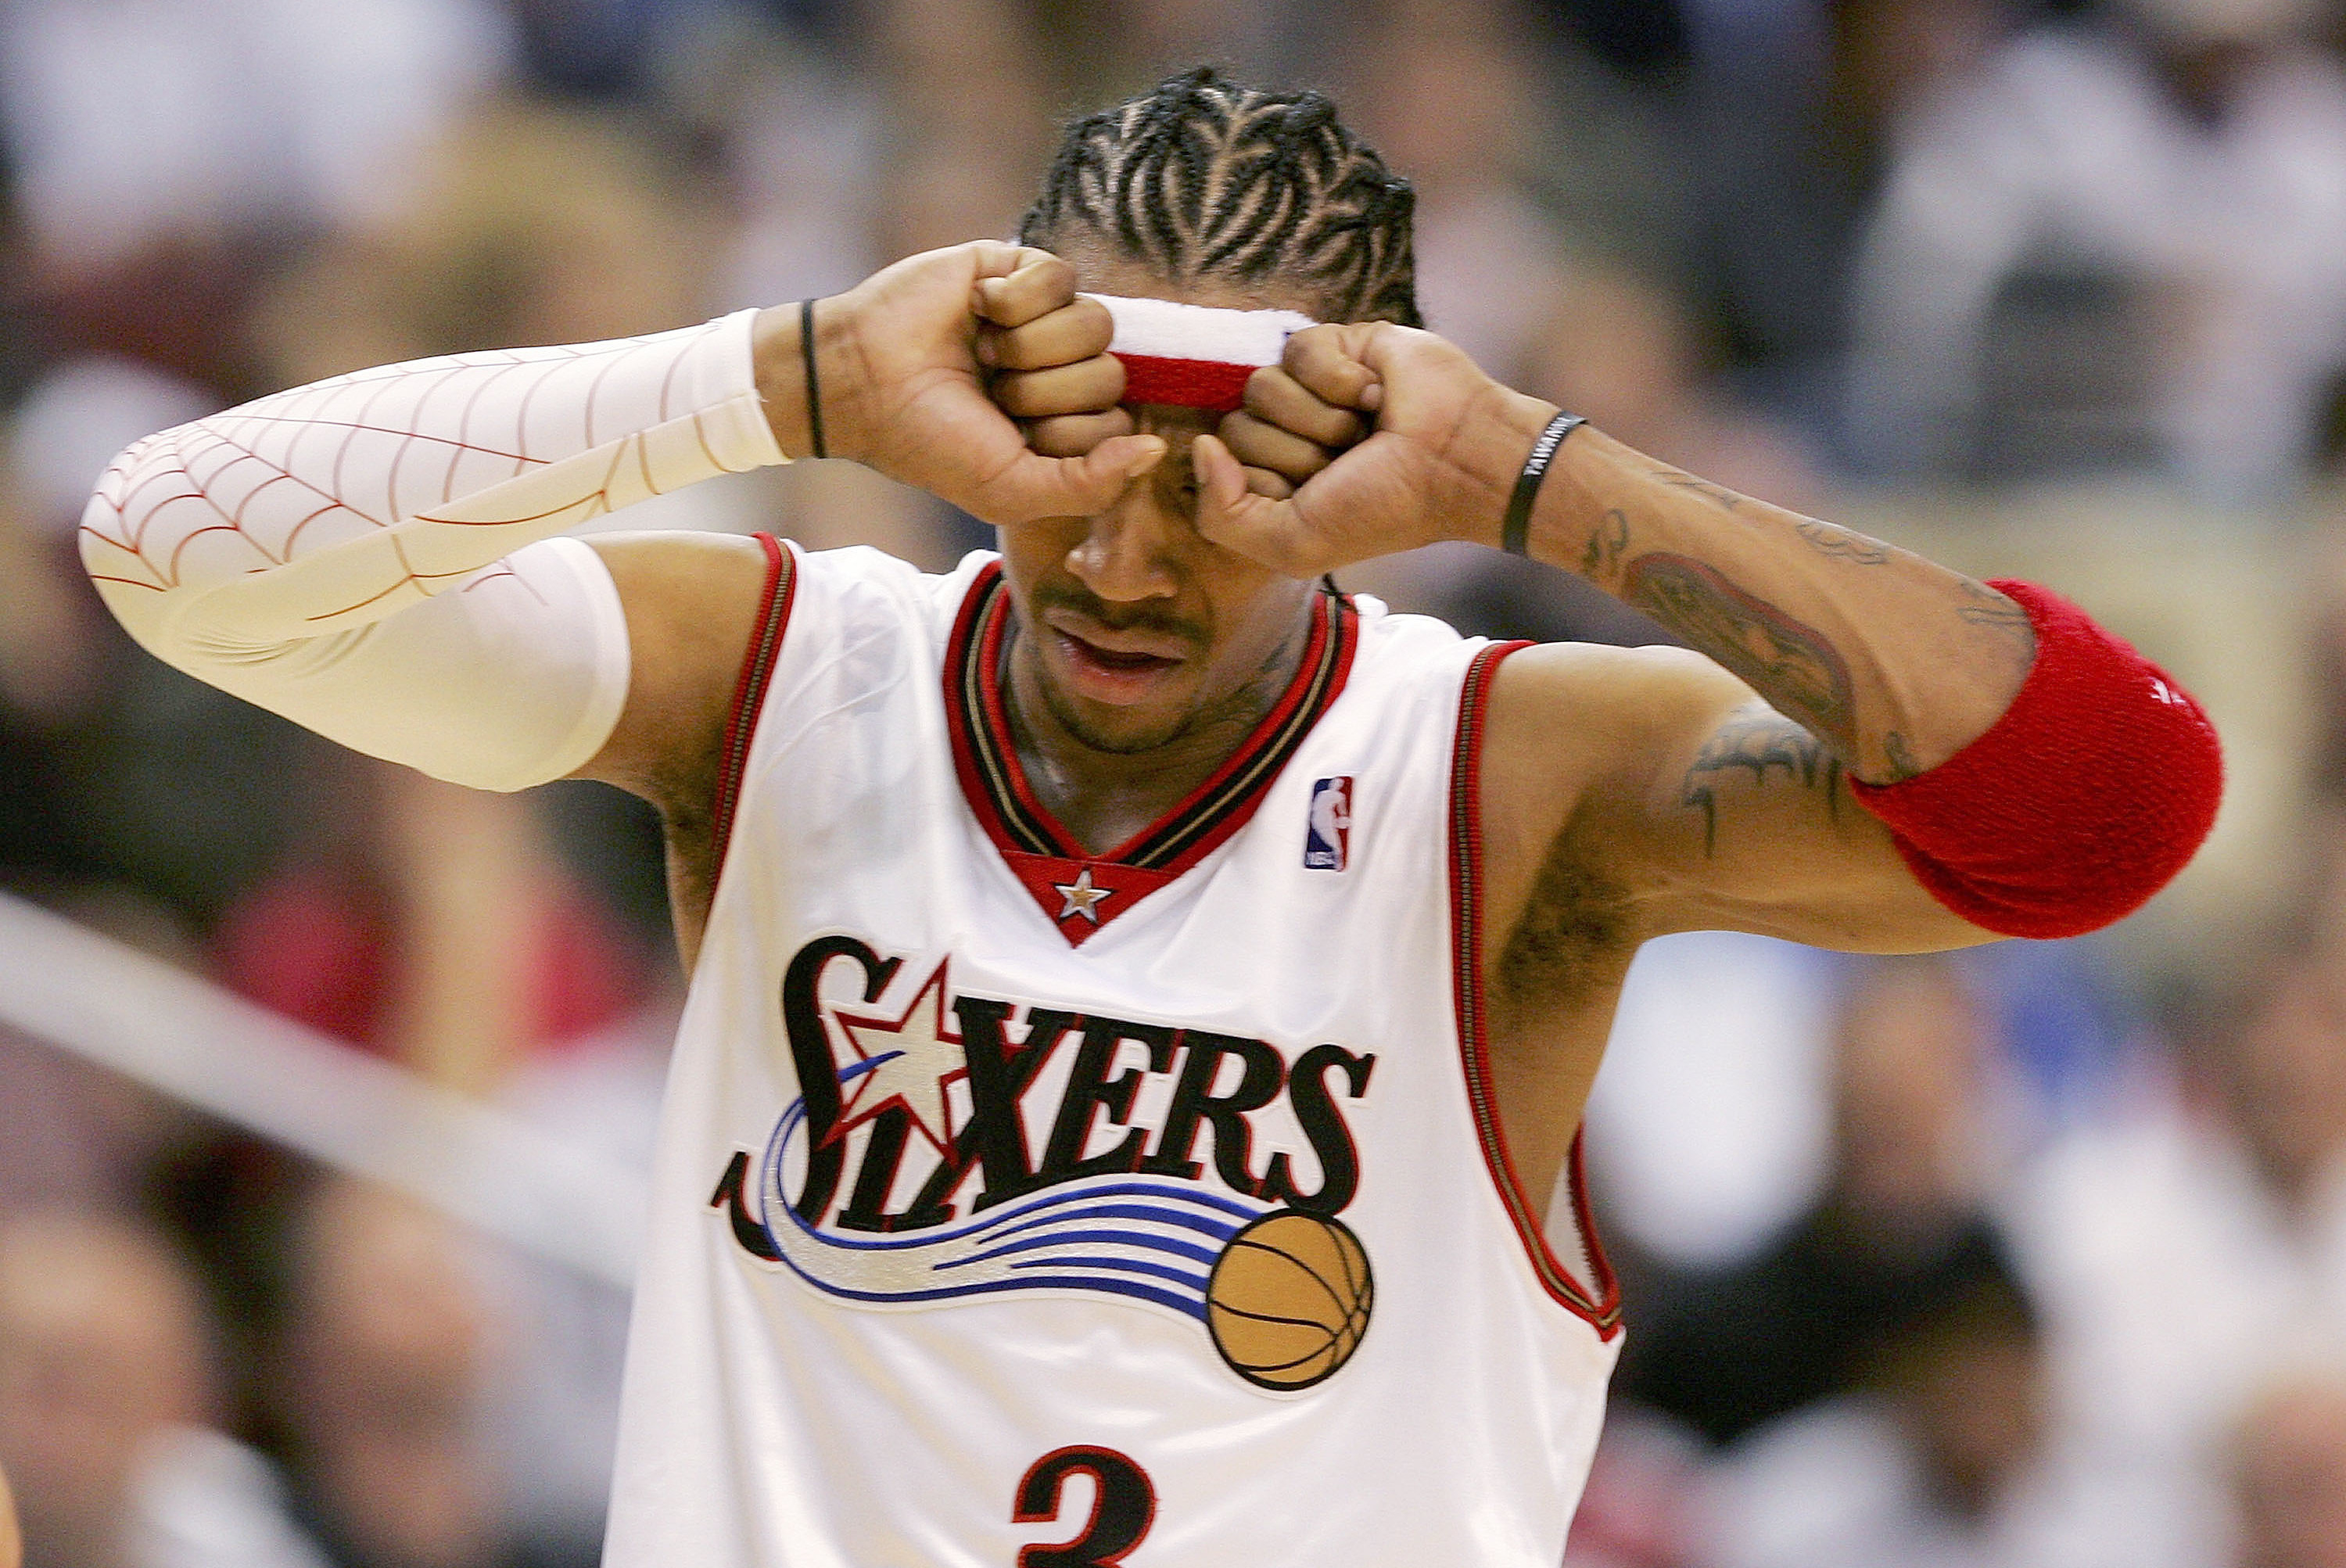 Remembering Allen Iverson's Hall of Fame career - Sports Illustrated